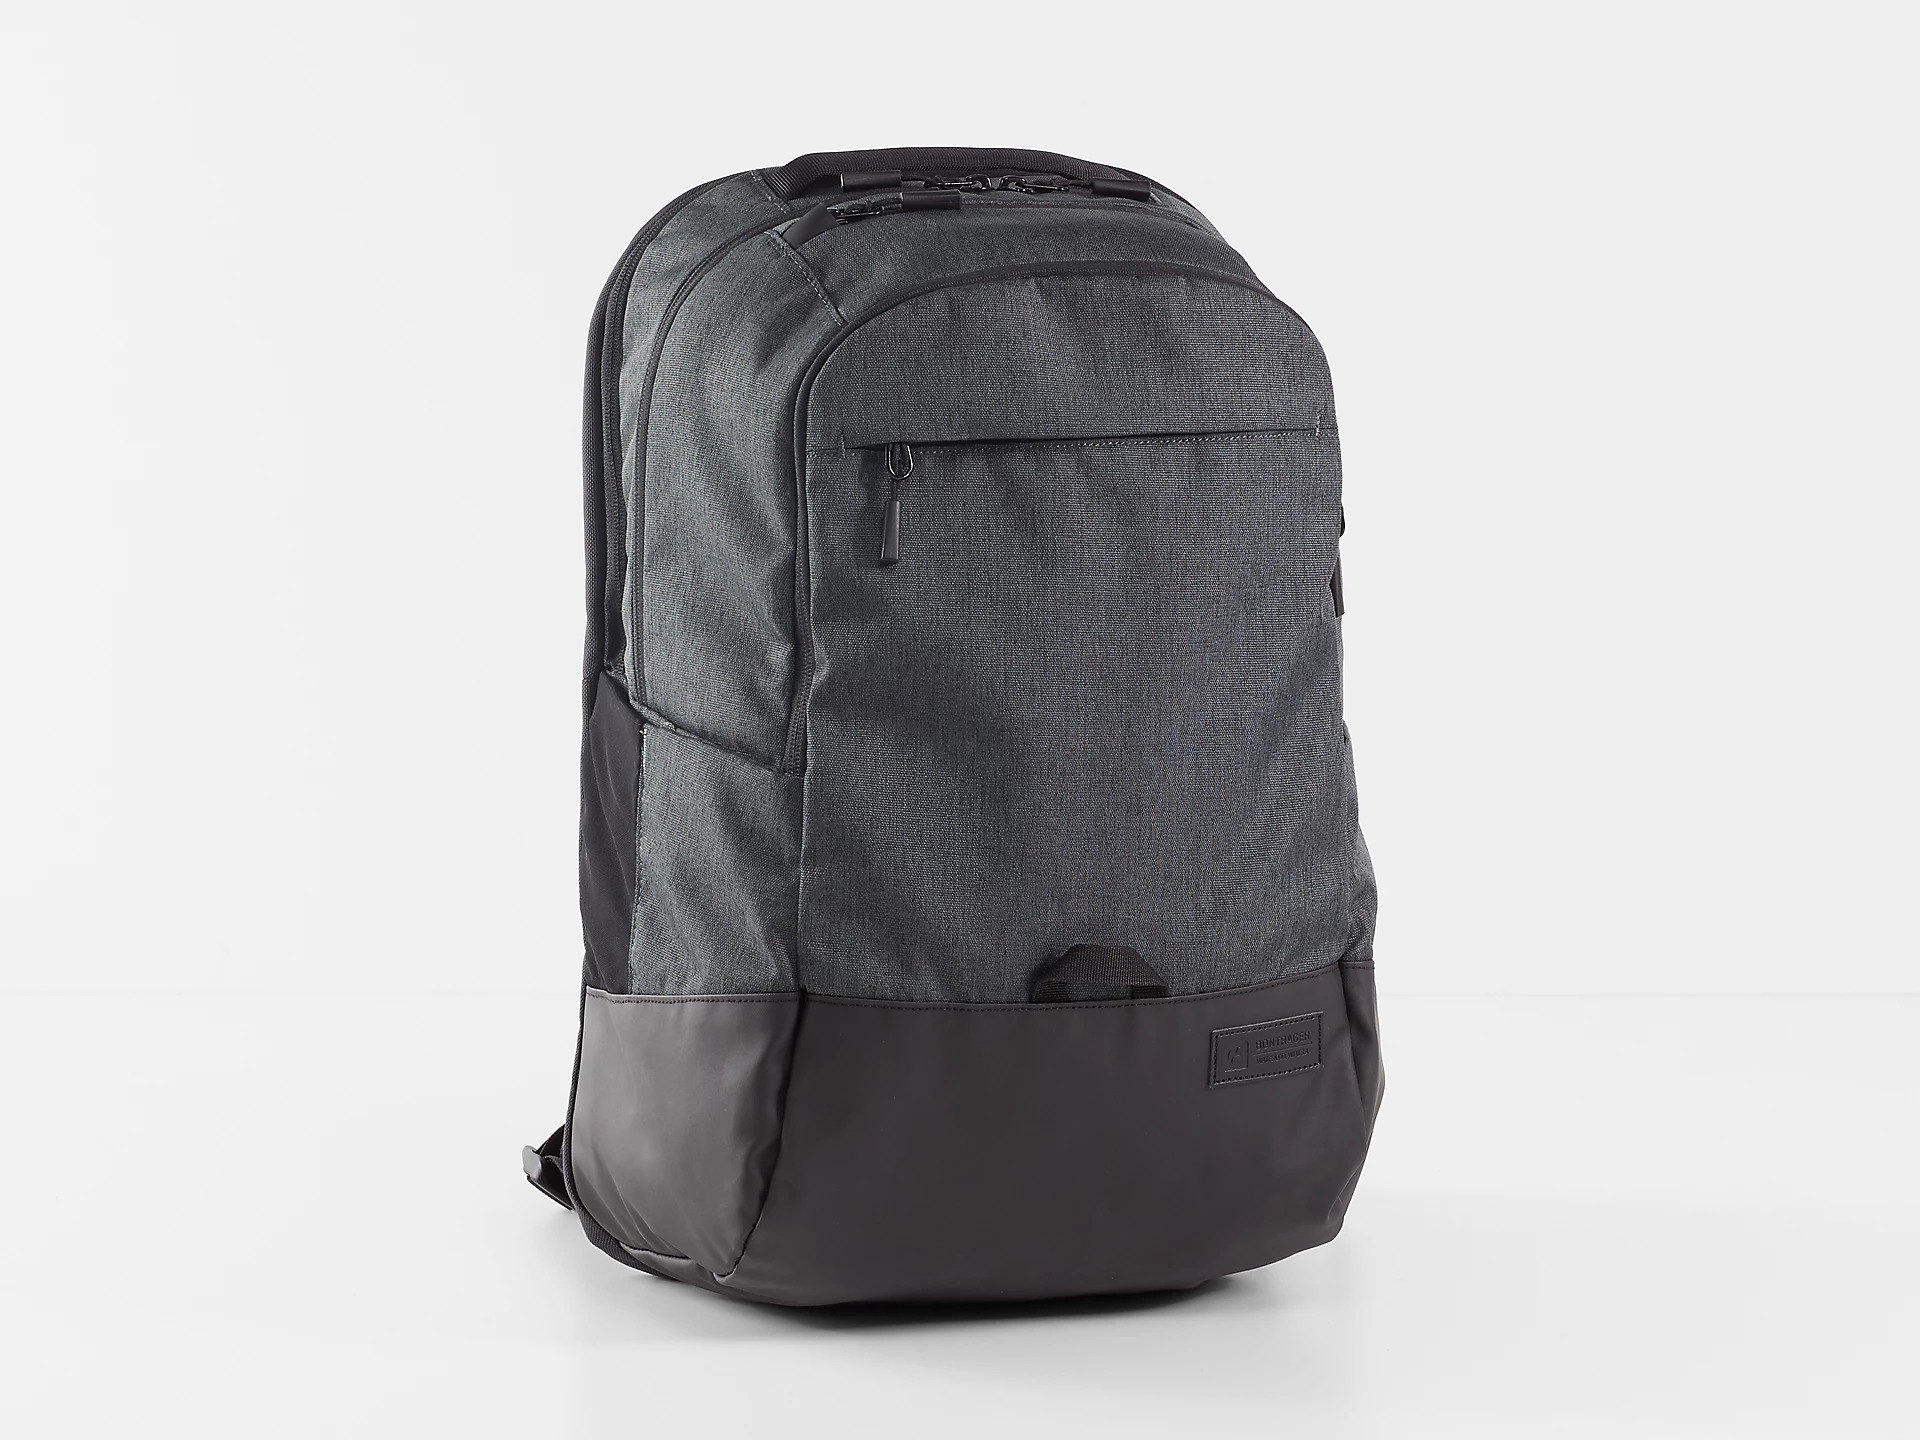 BontragerCommuterBackpack_33188_A_Primary